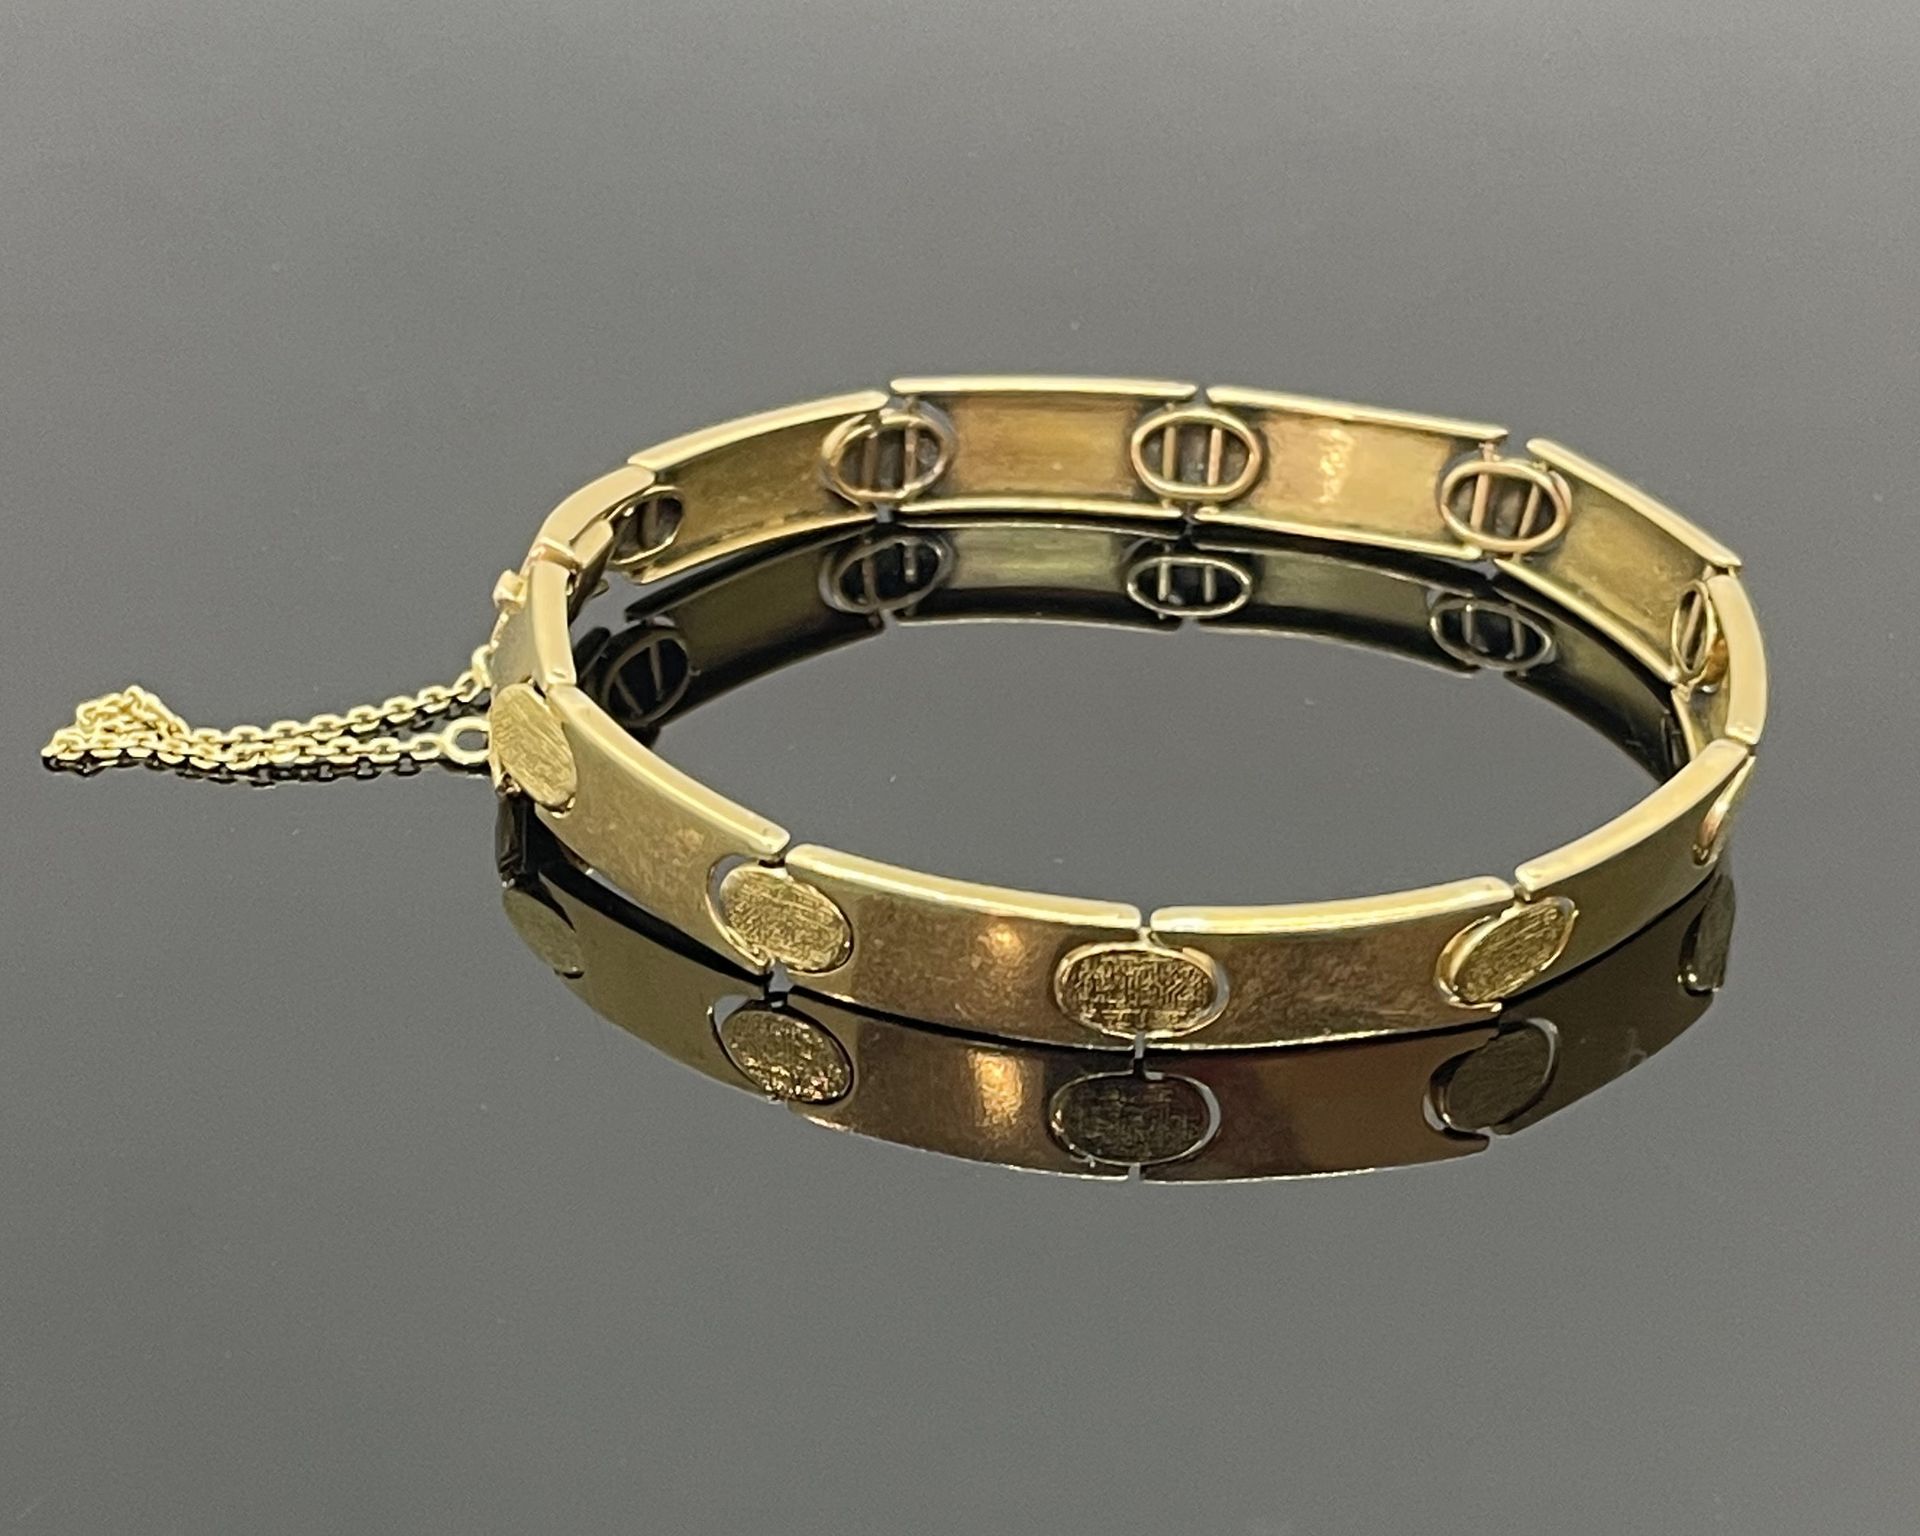 BRACELET in yellow gold 750 mils, the links plain and brushes in alternation. We&hellip;